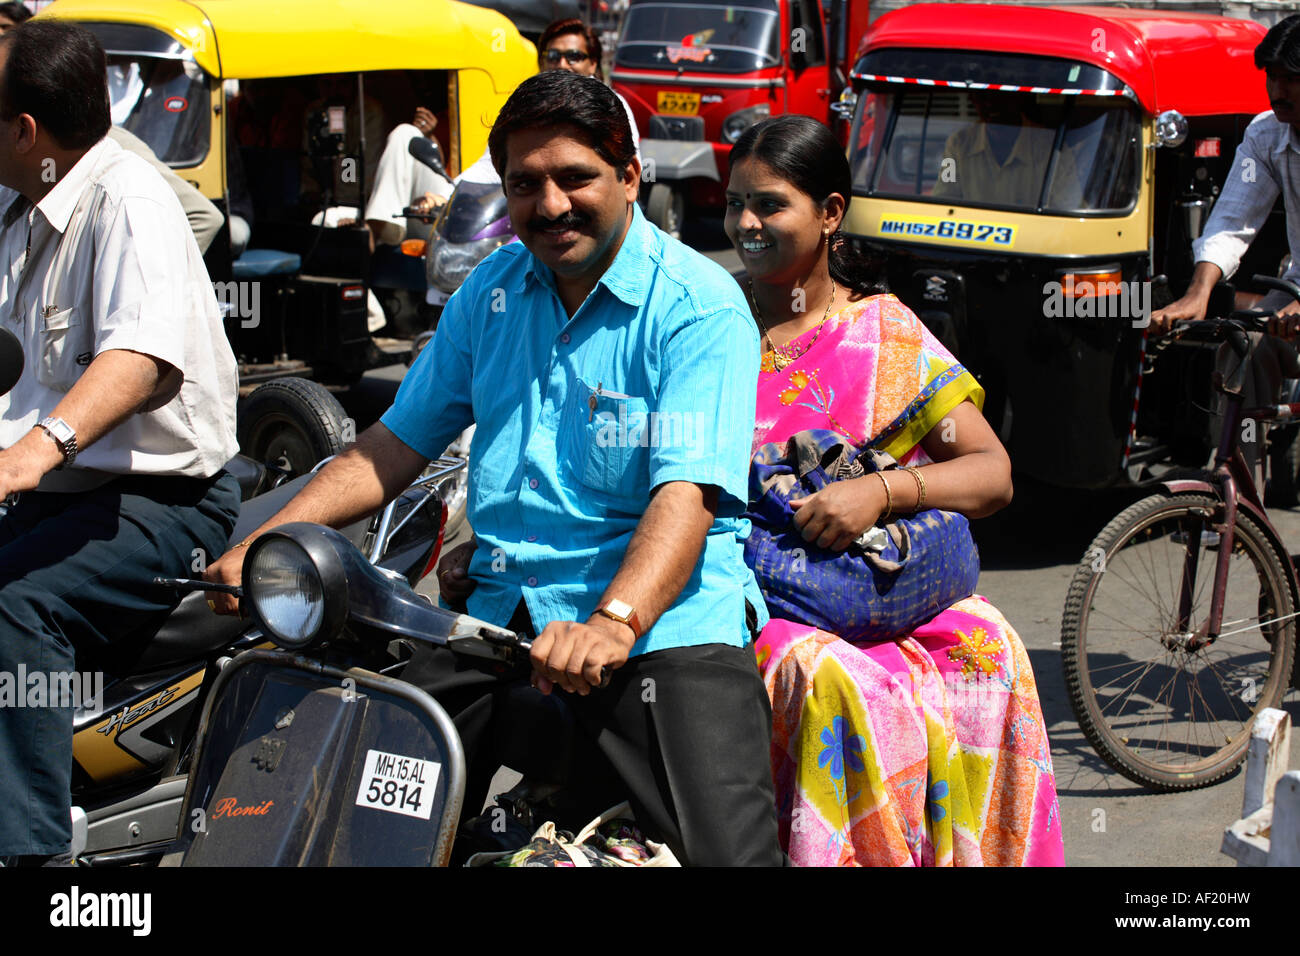 Indian couple riding on scooter without helmets in traffic, Nasik, India Stock Photo